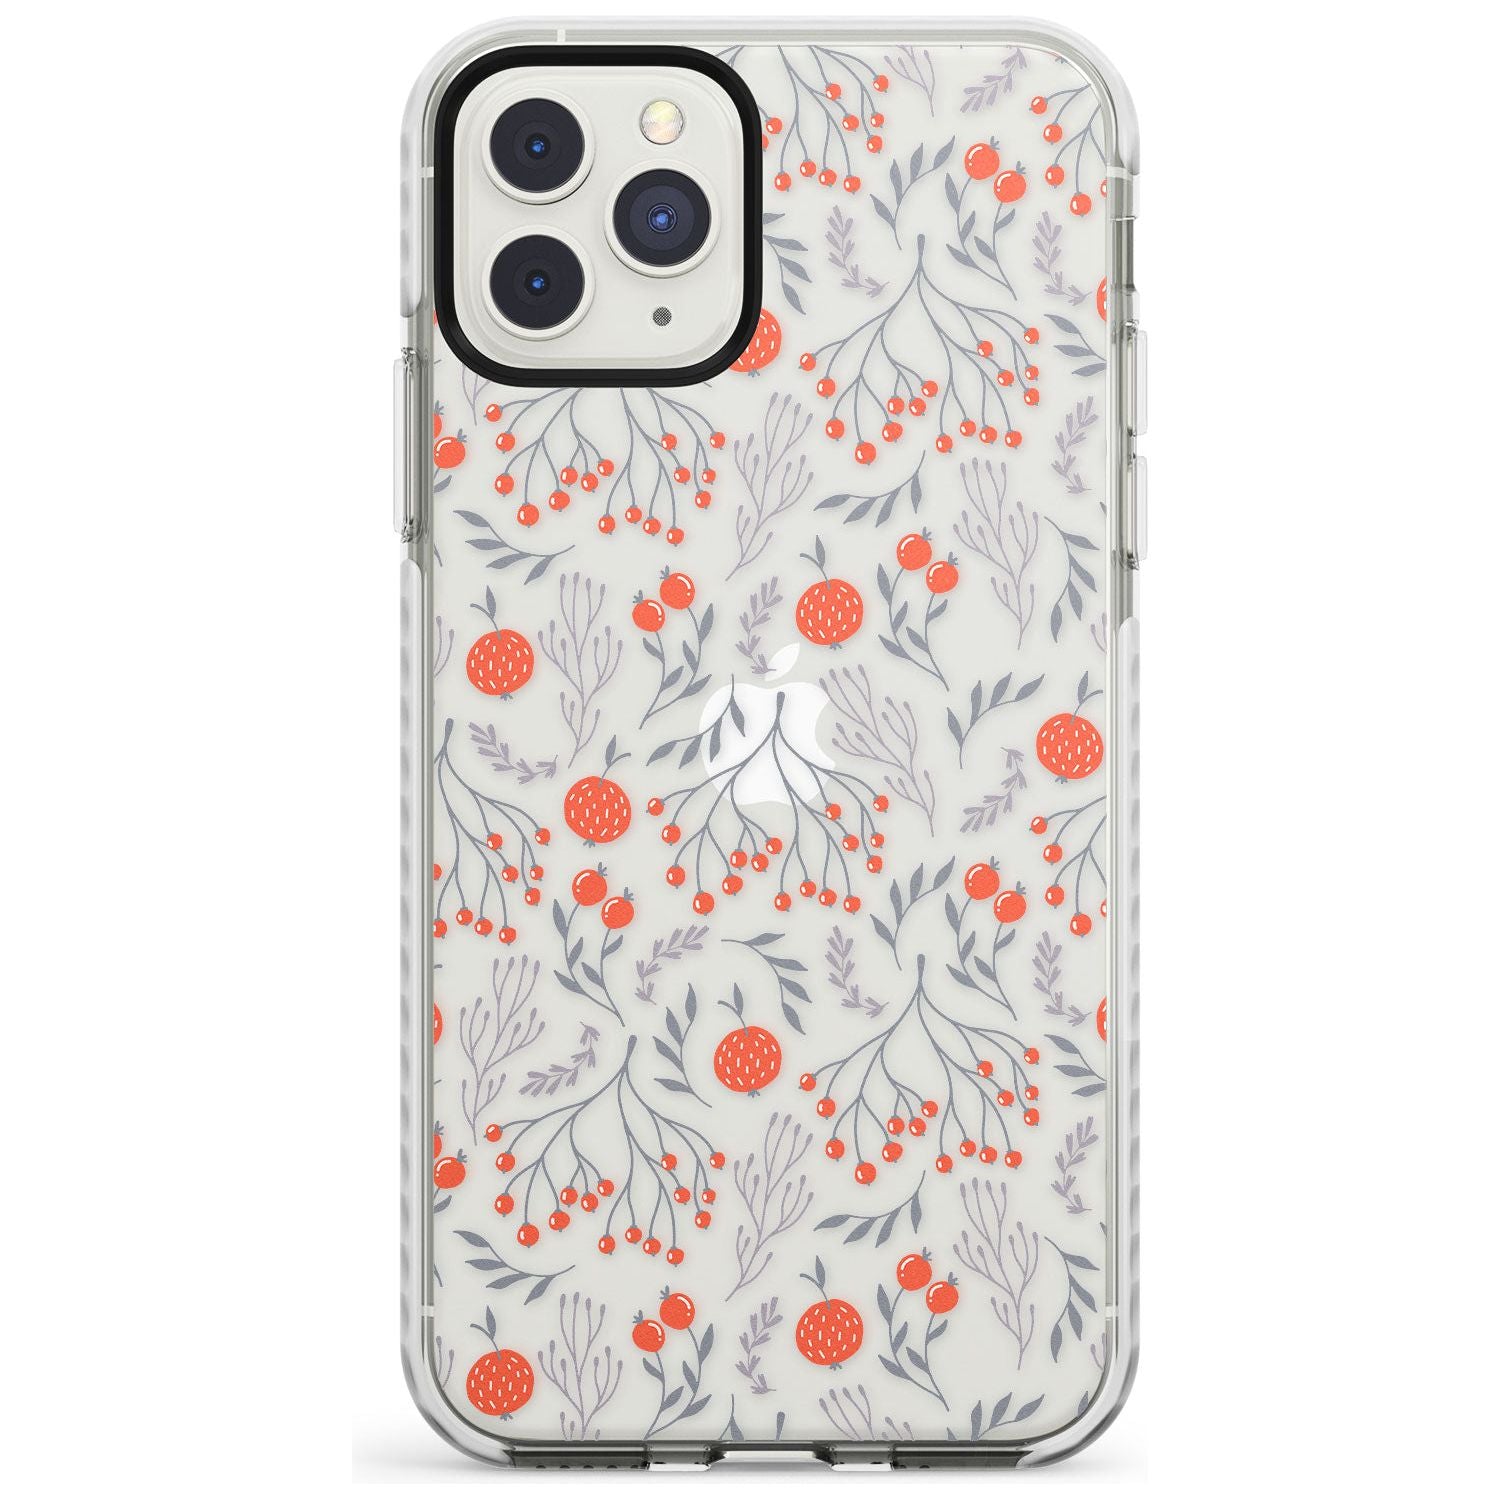 Red Fruits Transparent Floral Impact Phone Case for iPhone 11 Pro Max